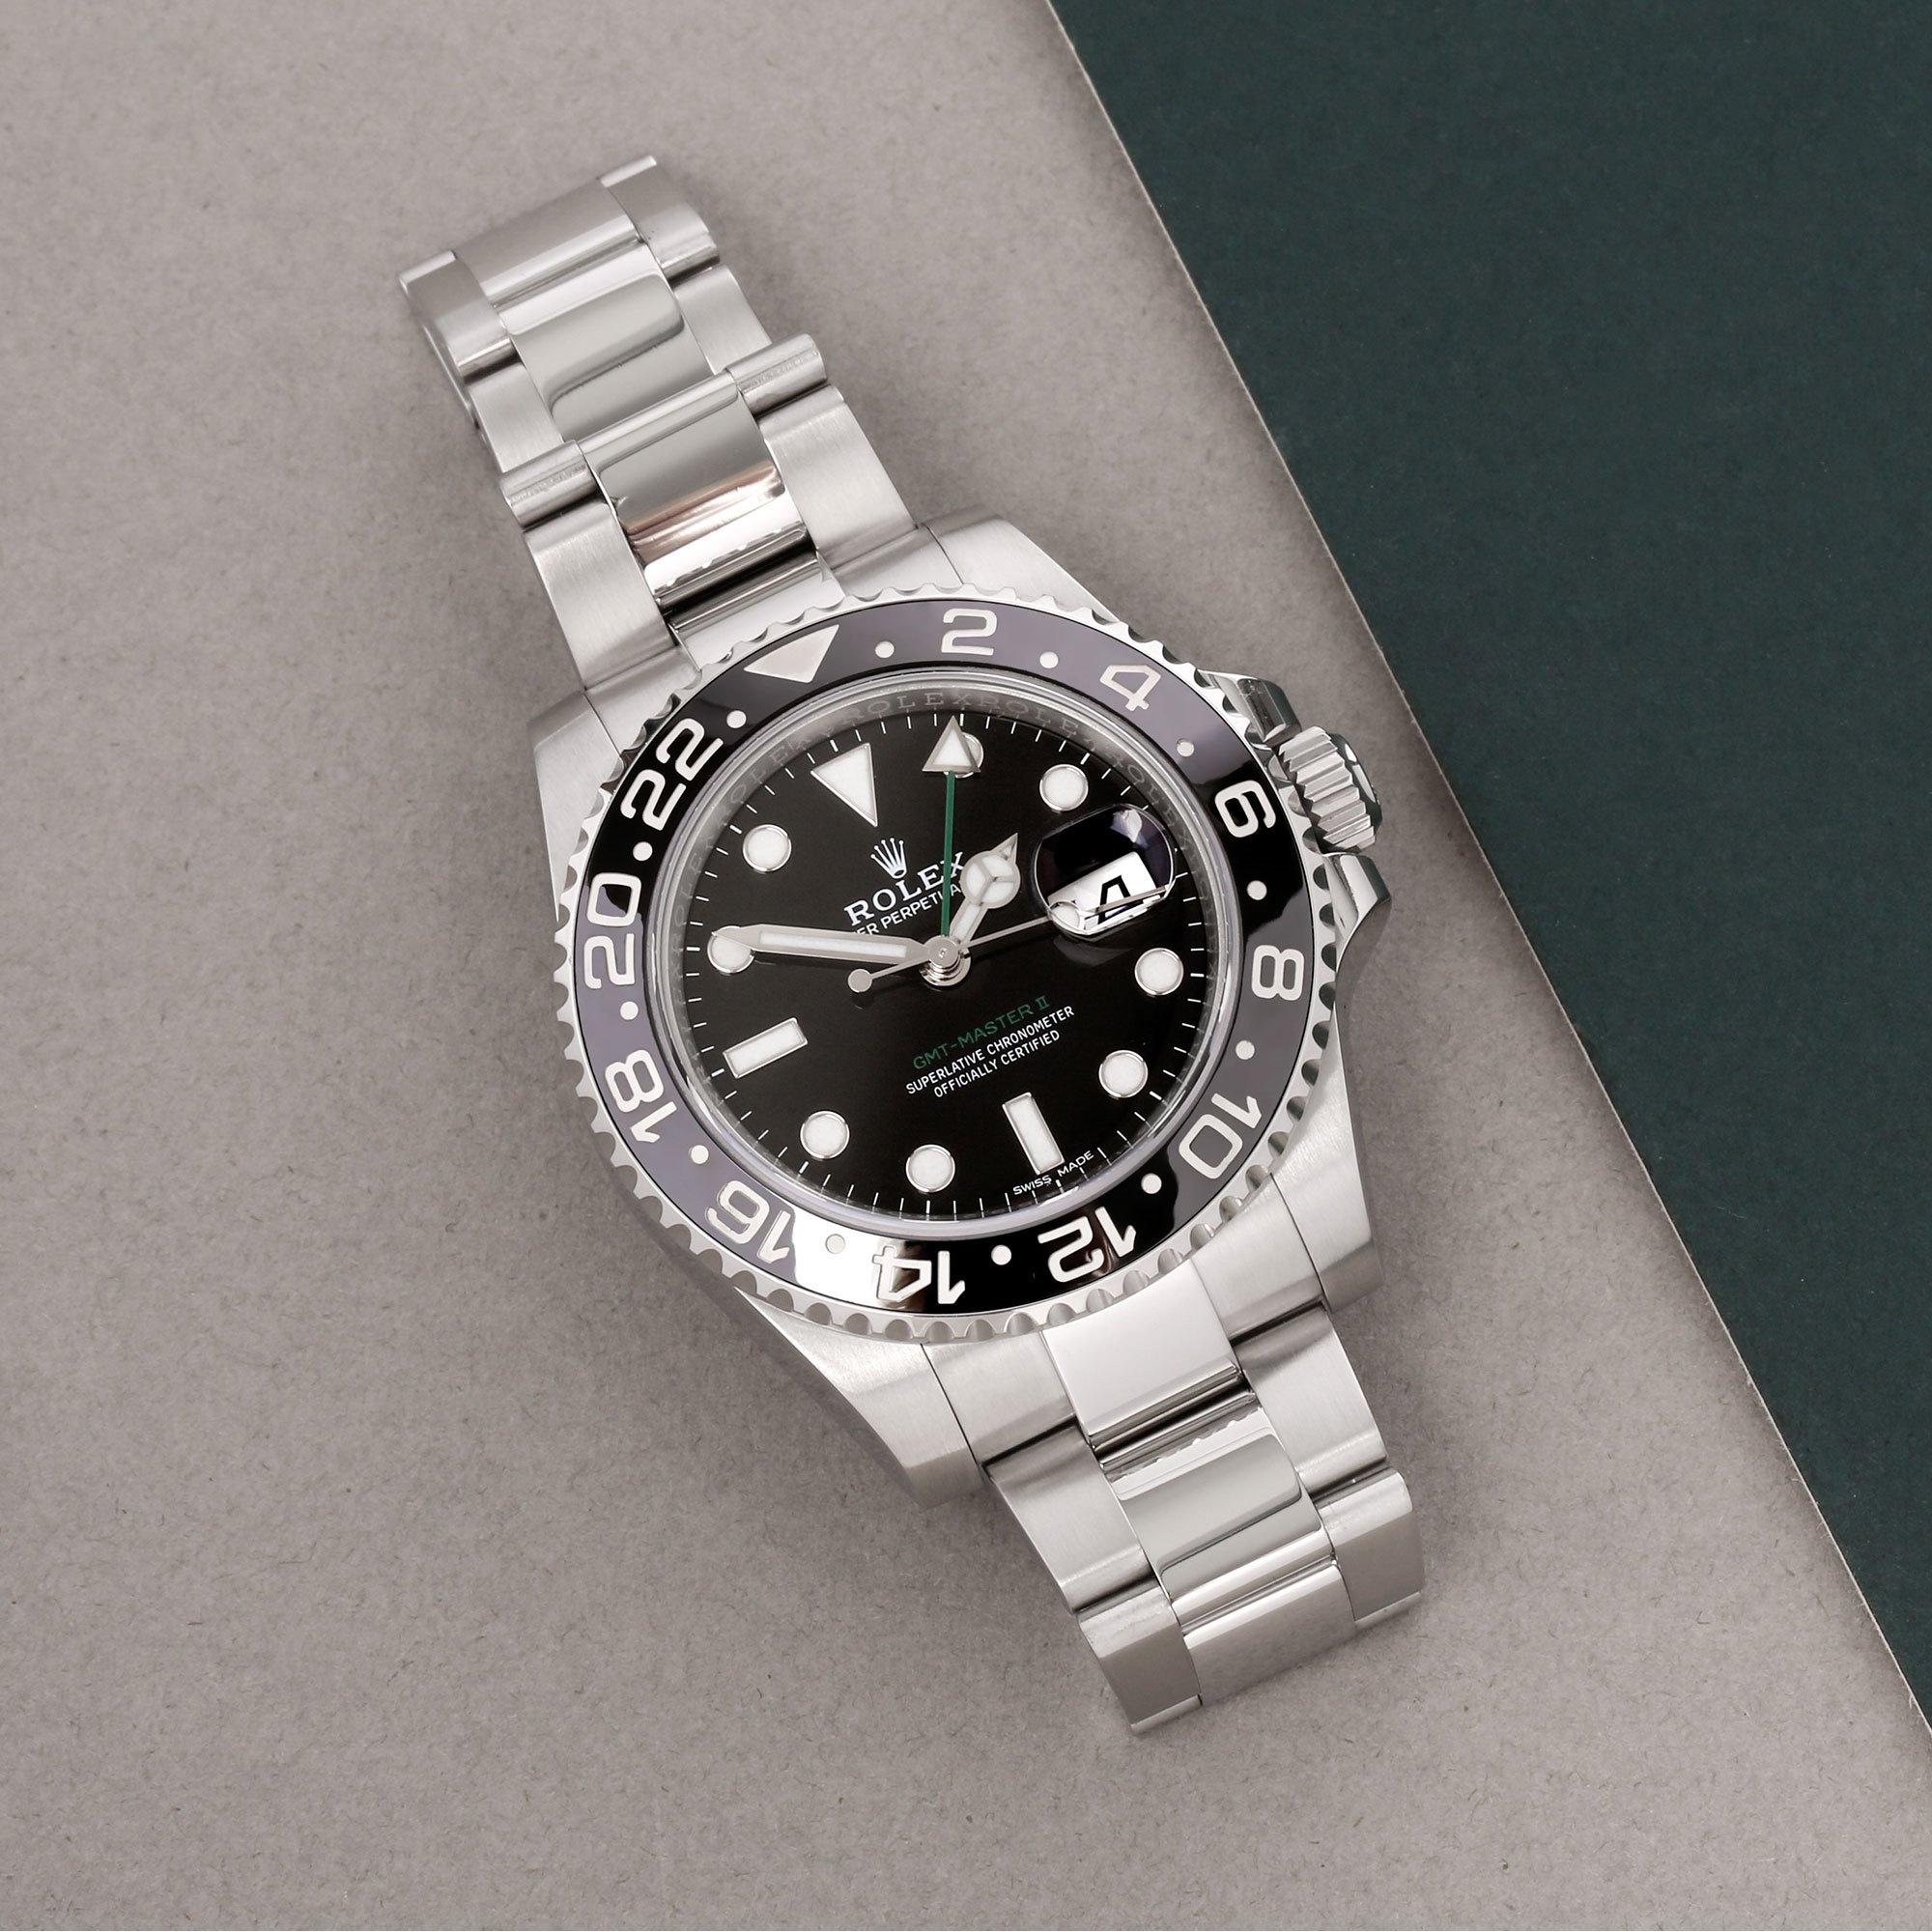 Xupes Reference: W007862
Manufacturer: Rolex
Model: GMT-Master II
Model Variant: 0
Model Number: 116710LN
Age: 2020
Gender: Men
Complete With: Rolex Box, Guarantee Manual, Swing Tag & Open Guarantee Card
Dial: Black Other
Glass: Sapphire